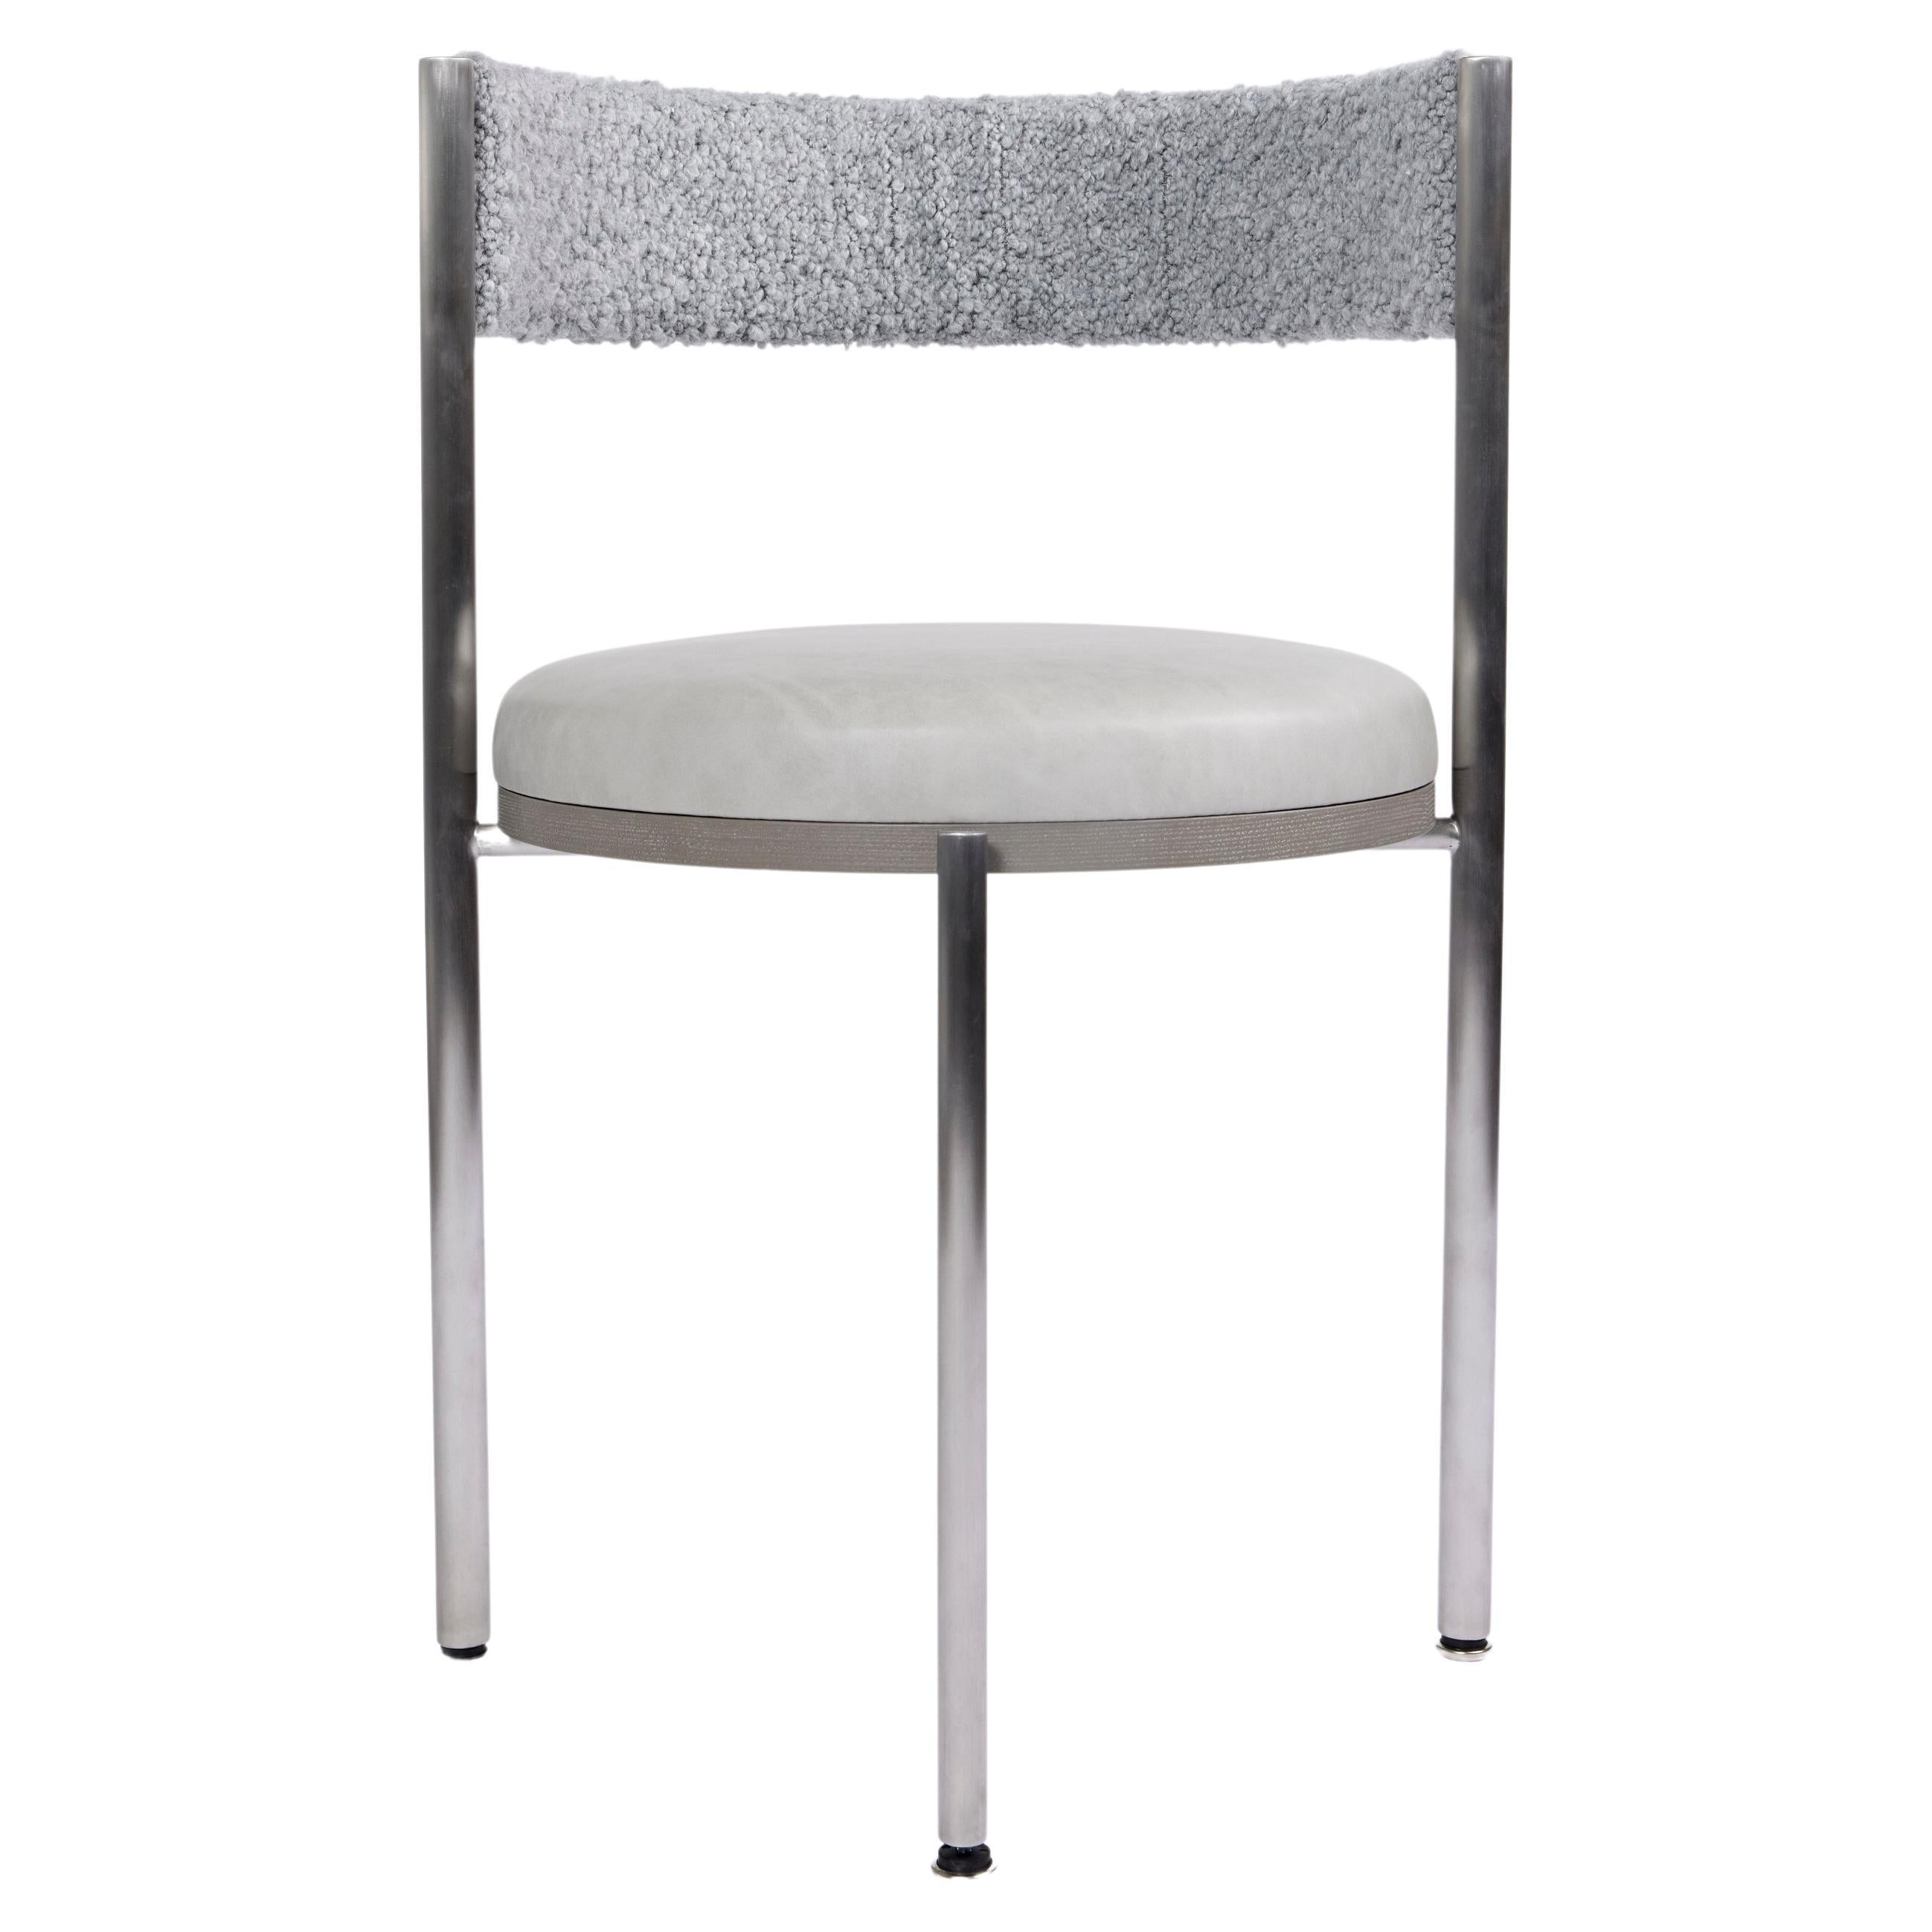 Kaleidoscope, Dining Chair in Brushed Stainless with Leather and Bouclé